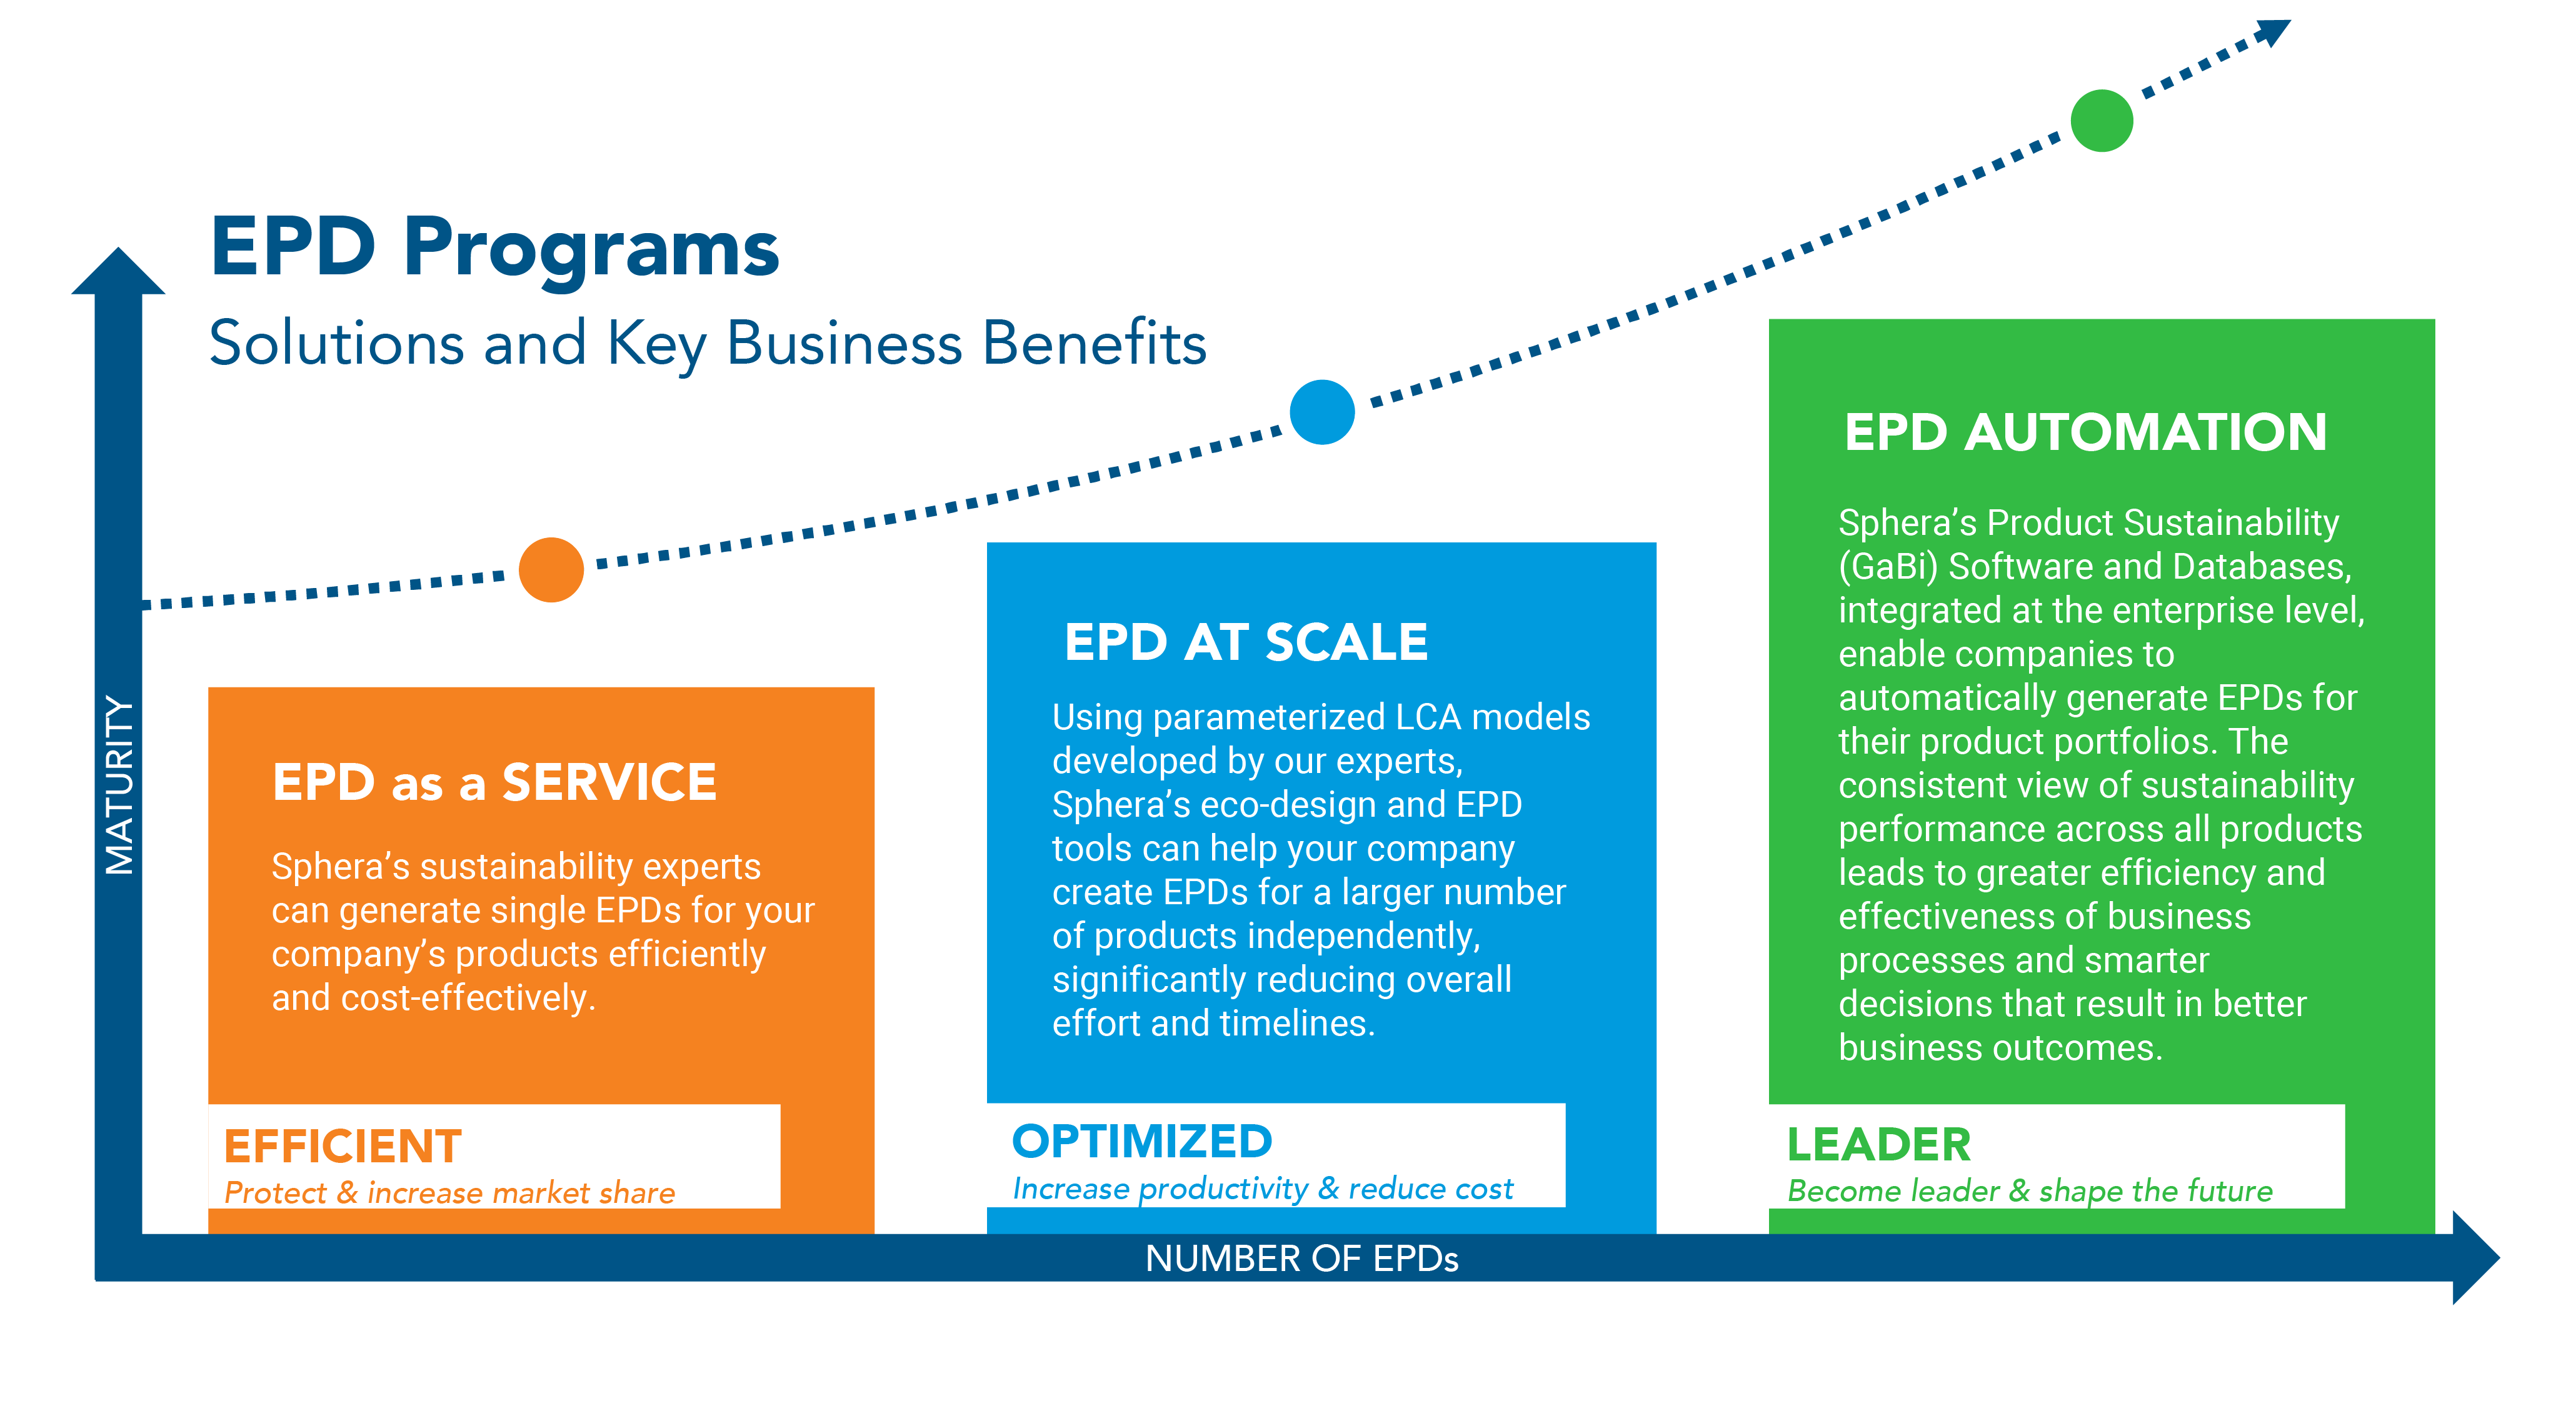 Boost ESG Performance with EPD Solutions Tailored to Your Company’s Needs